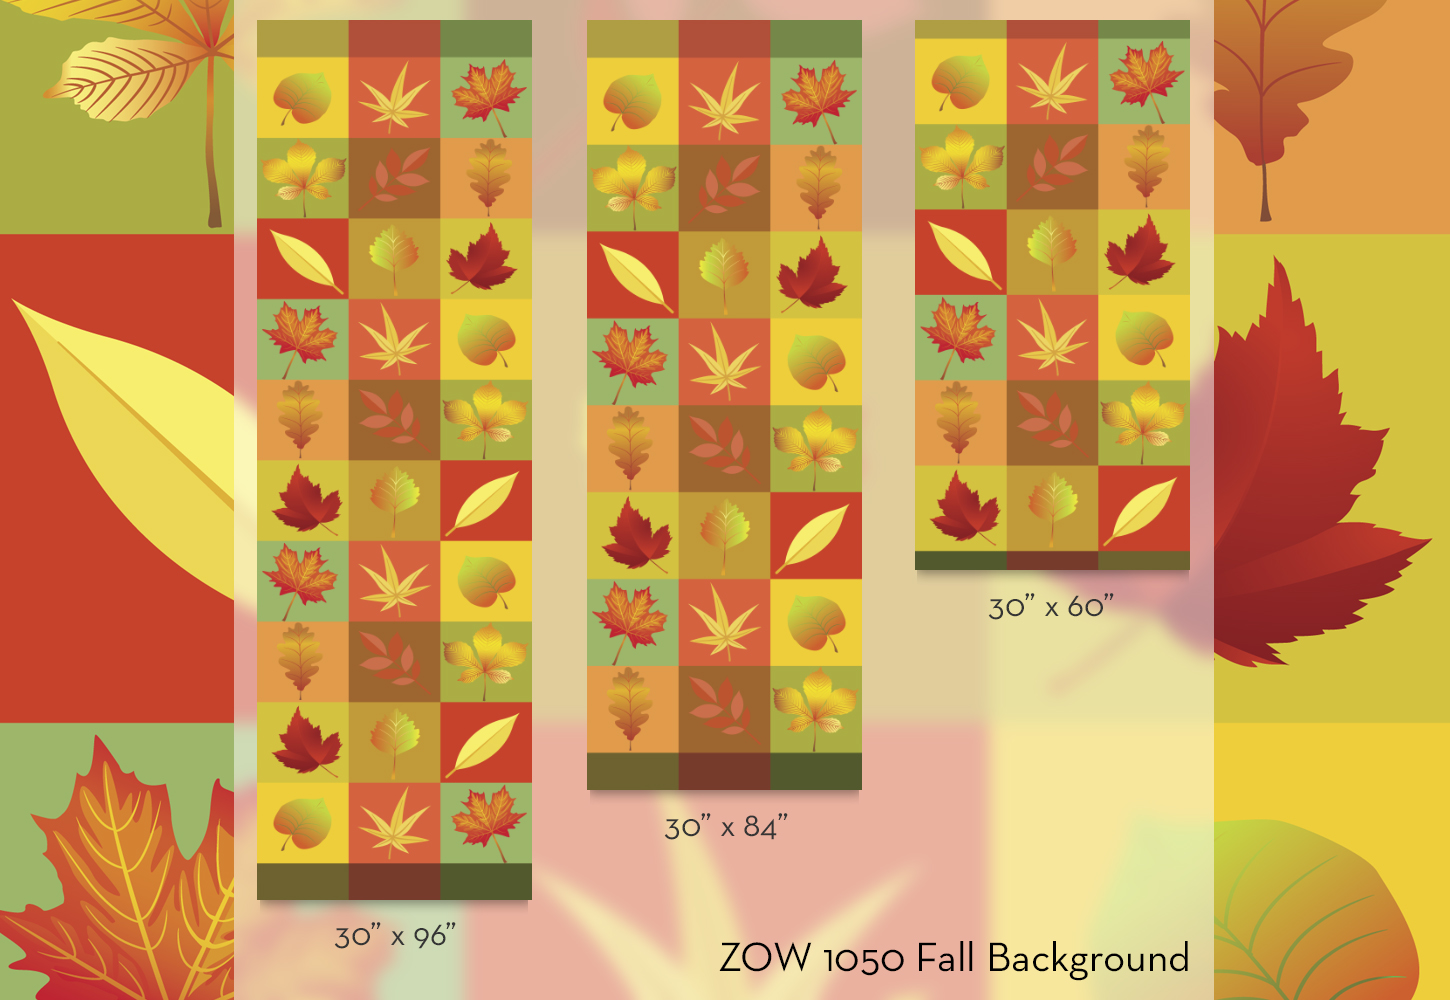 ZOW 1050 Fall Background